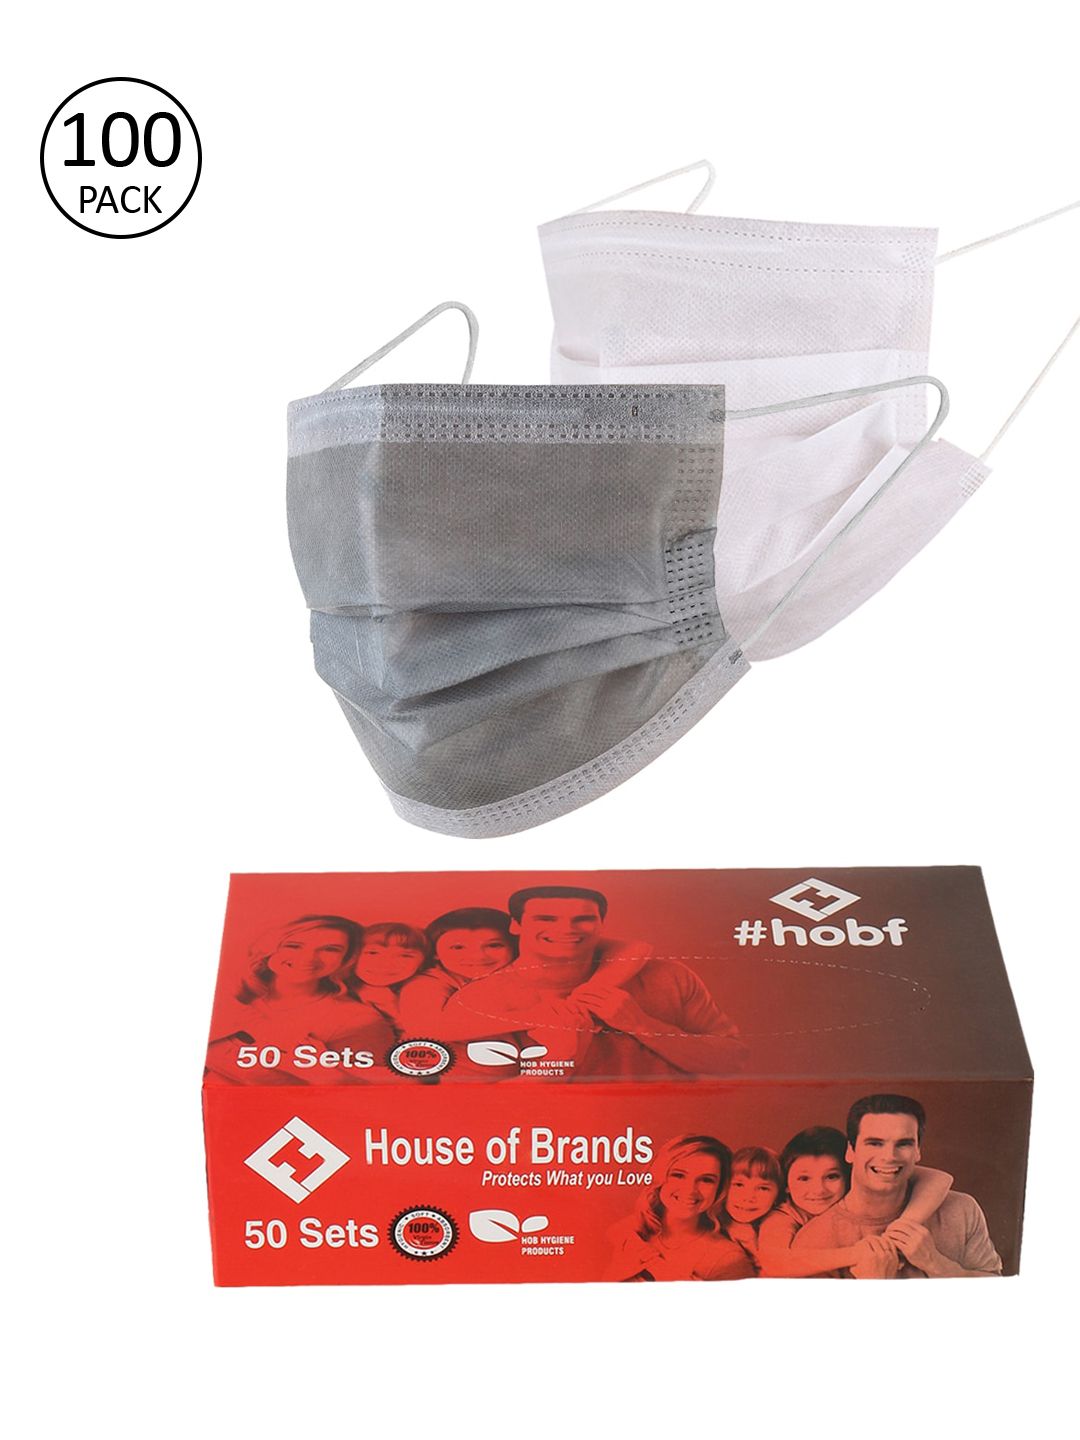 LONDON FASHION hob Unisex Pack of 100 3-Ply Anti-Pollution Disposable Ultrasonic Surgical Masks Price in India